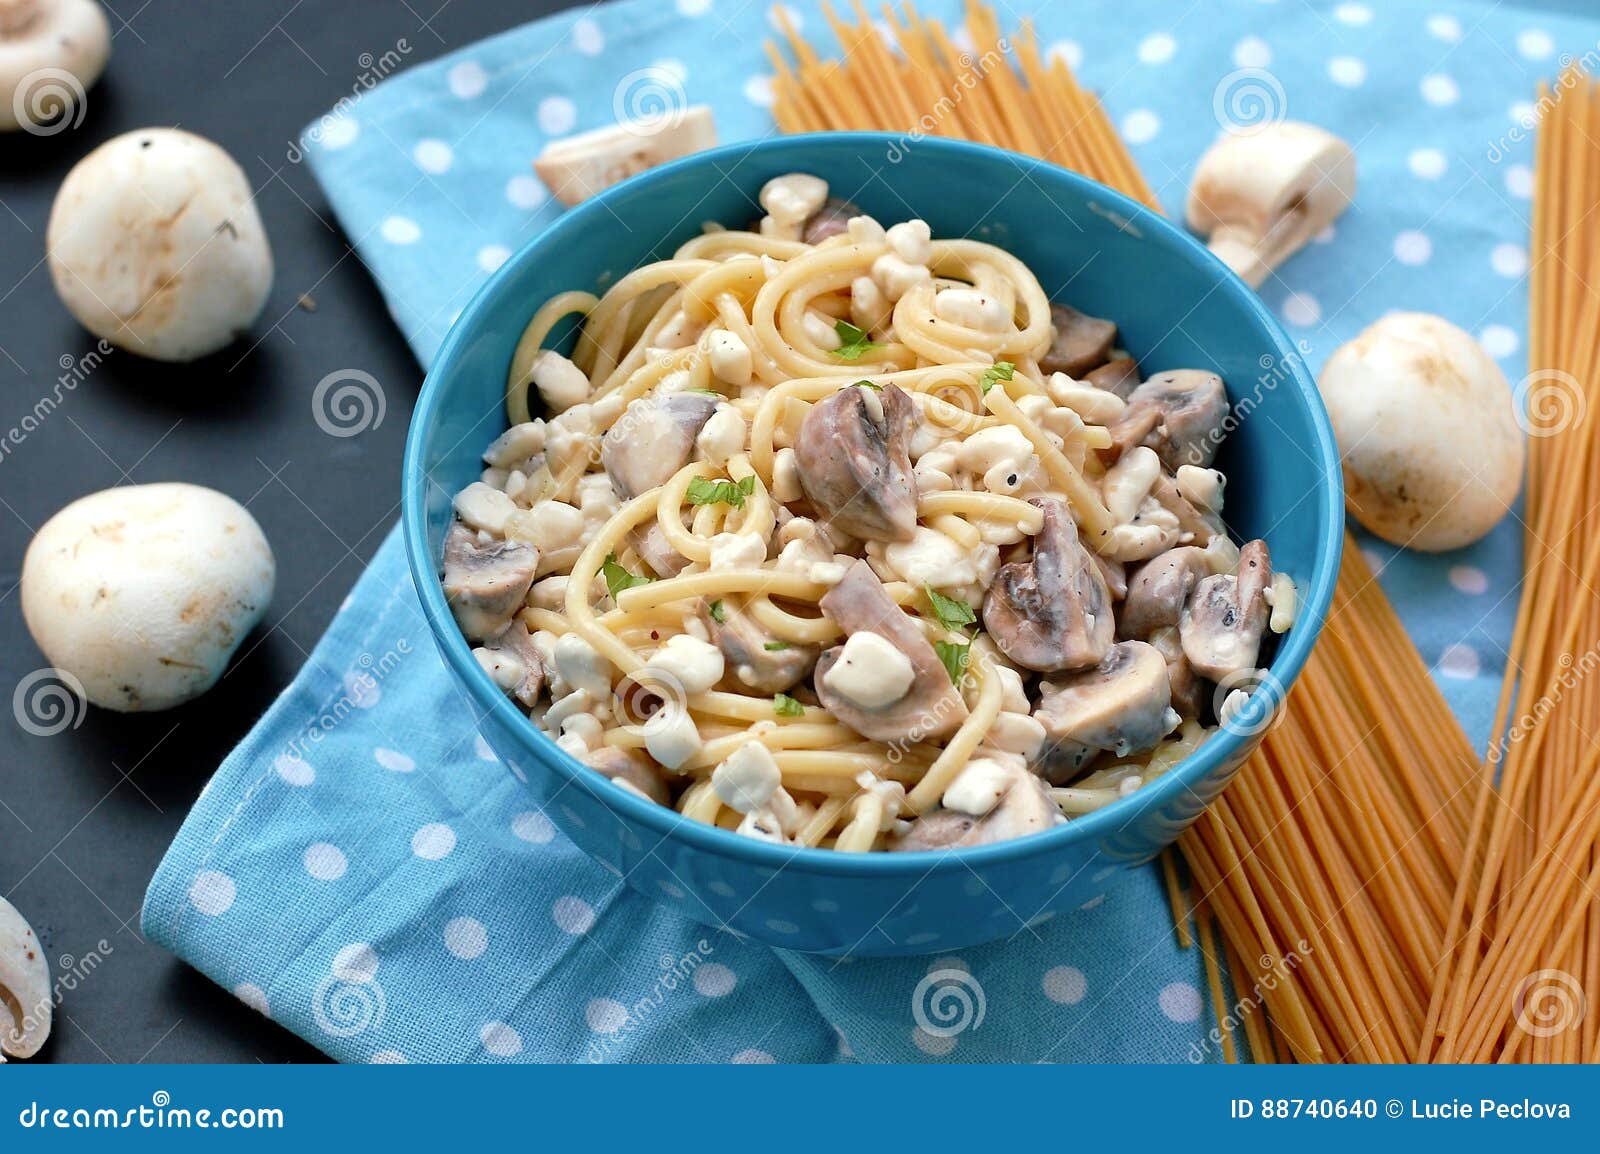 Meal From Pasta Spaghetti Mushroom Cottage Cheese And Parsley In